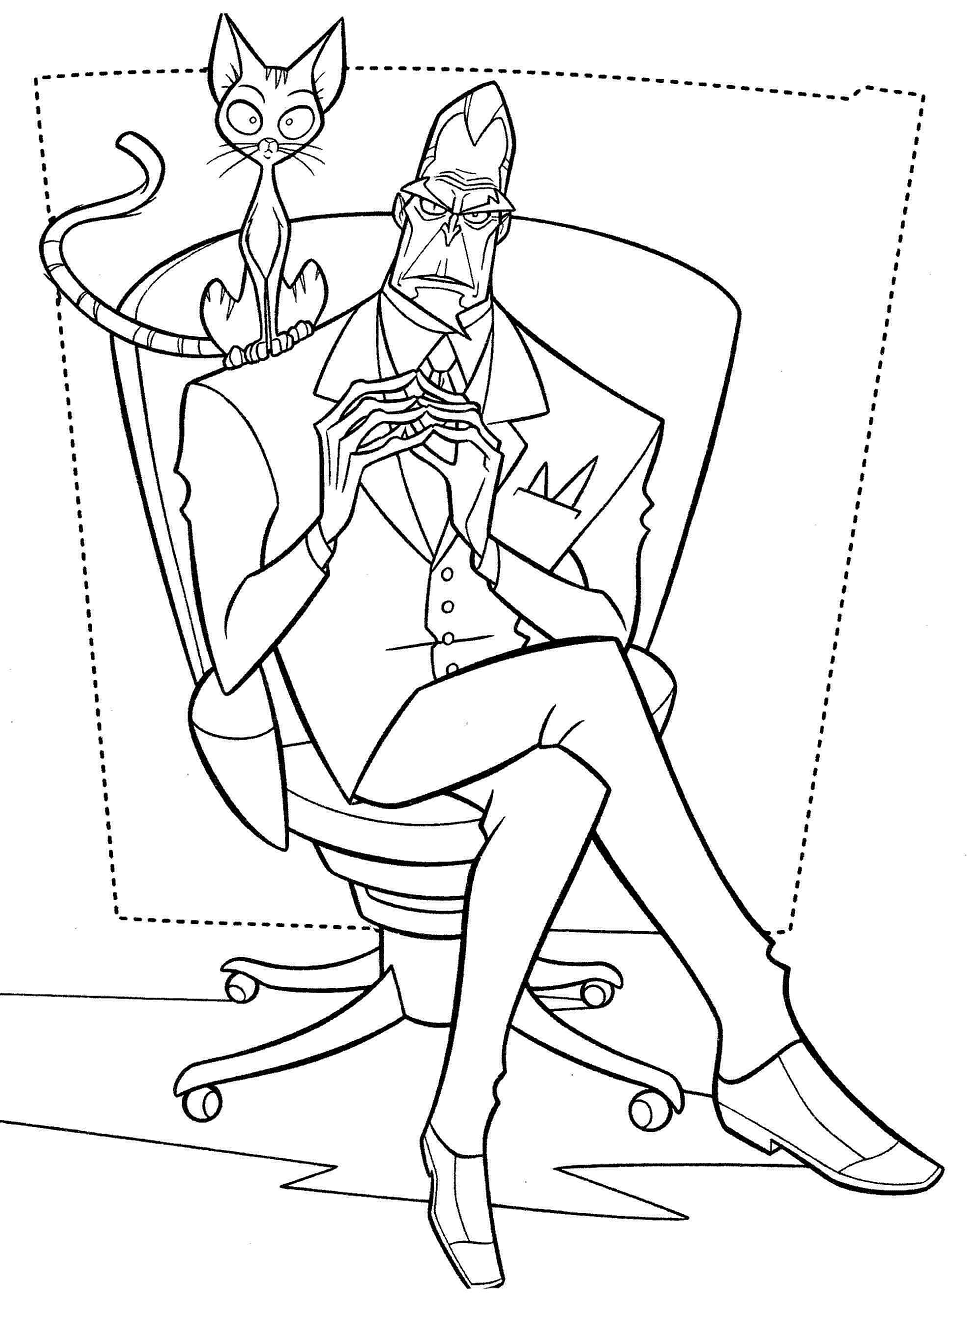 Doctor Calico And His Cat Coloring Page